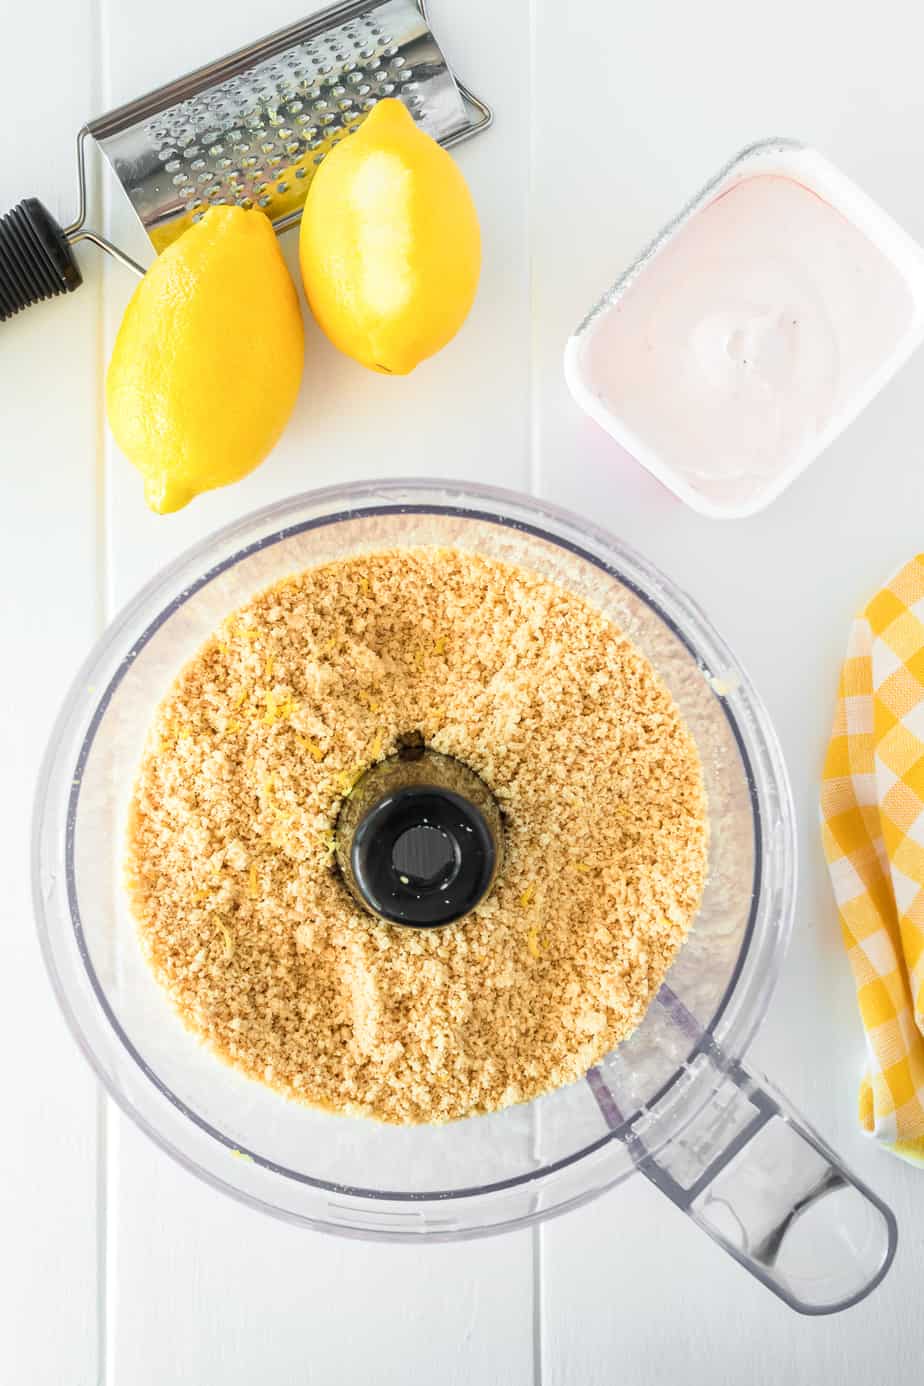 vanilla sandwich cookie crumbs in a food processor from overhead with lemons, a lemon zester and strawberry cream cheese nearby